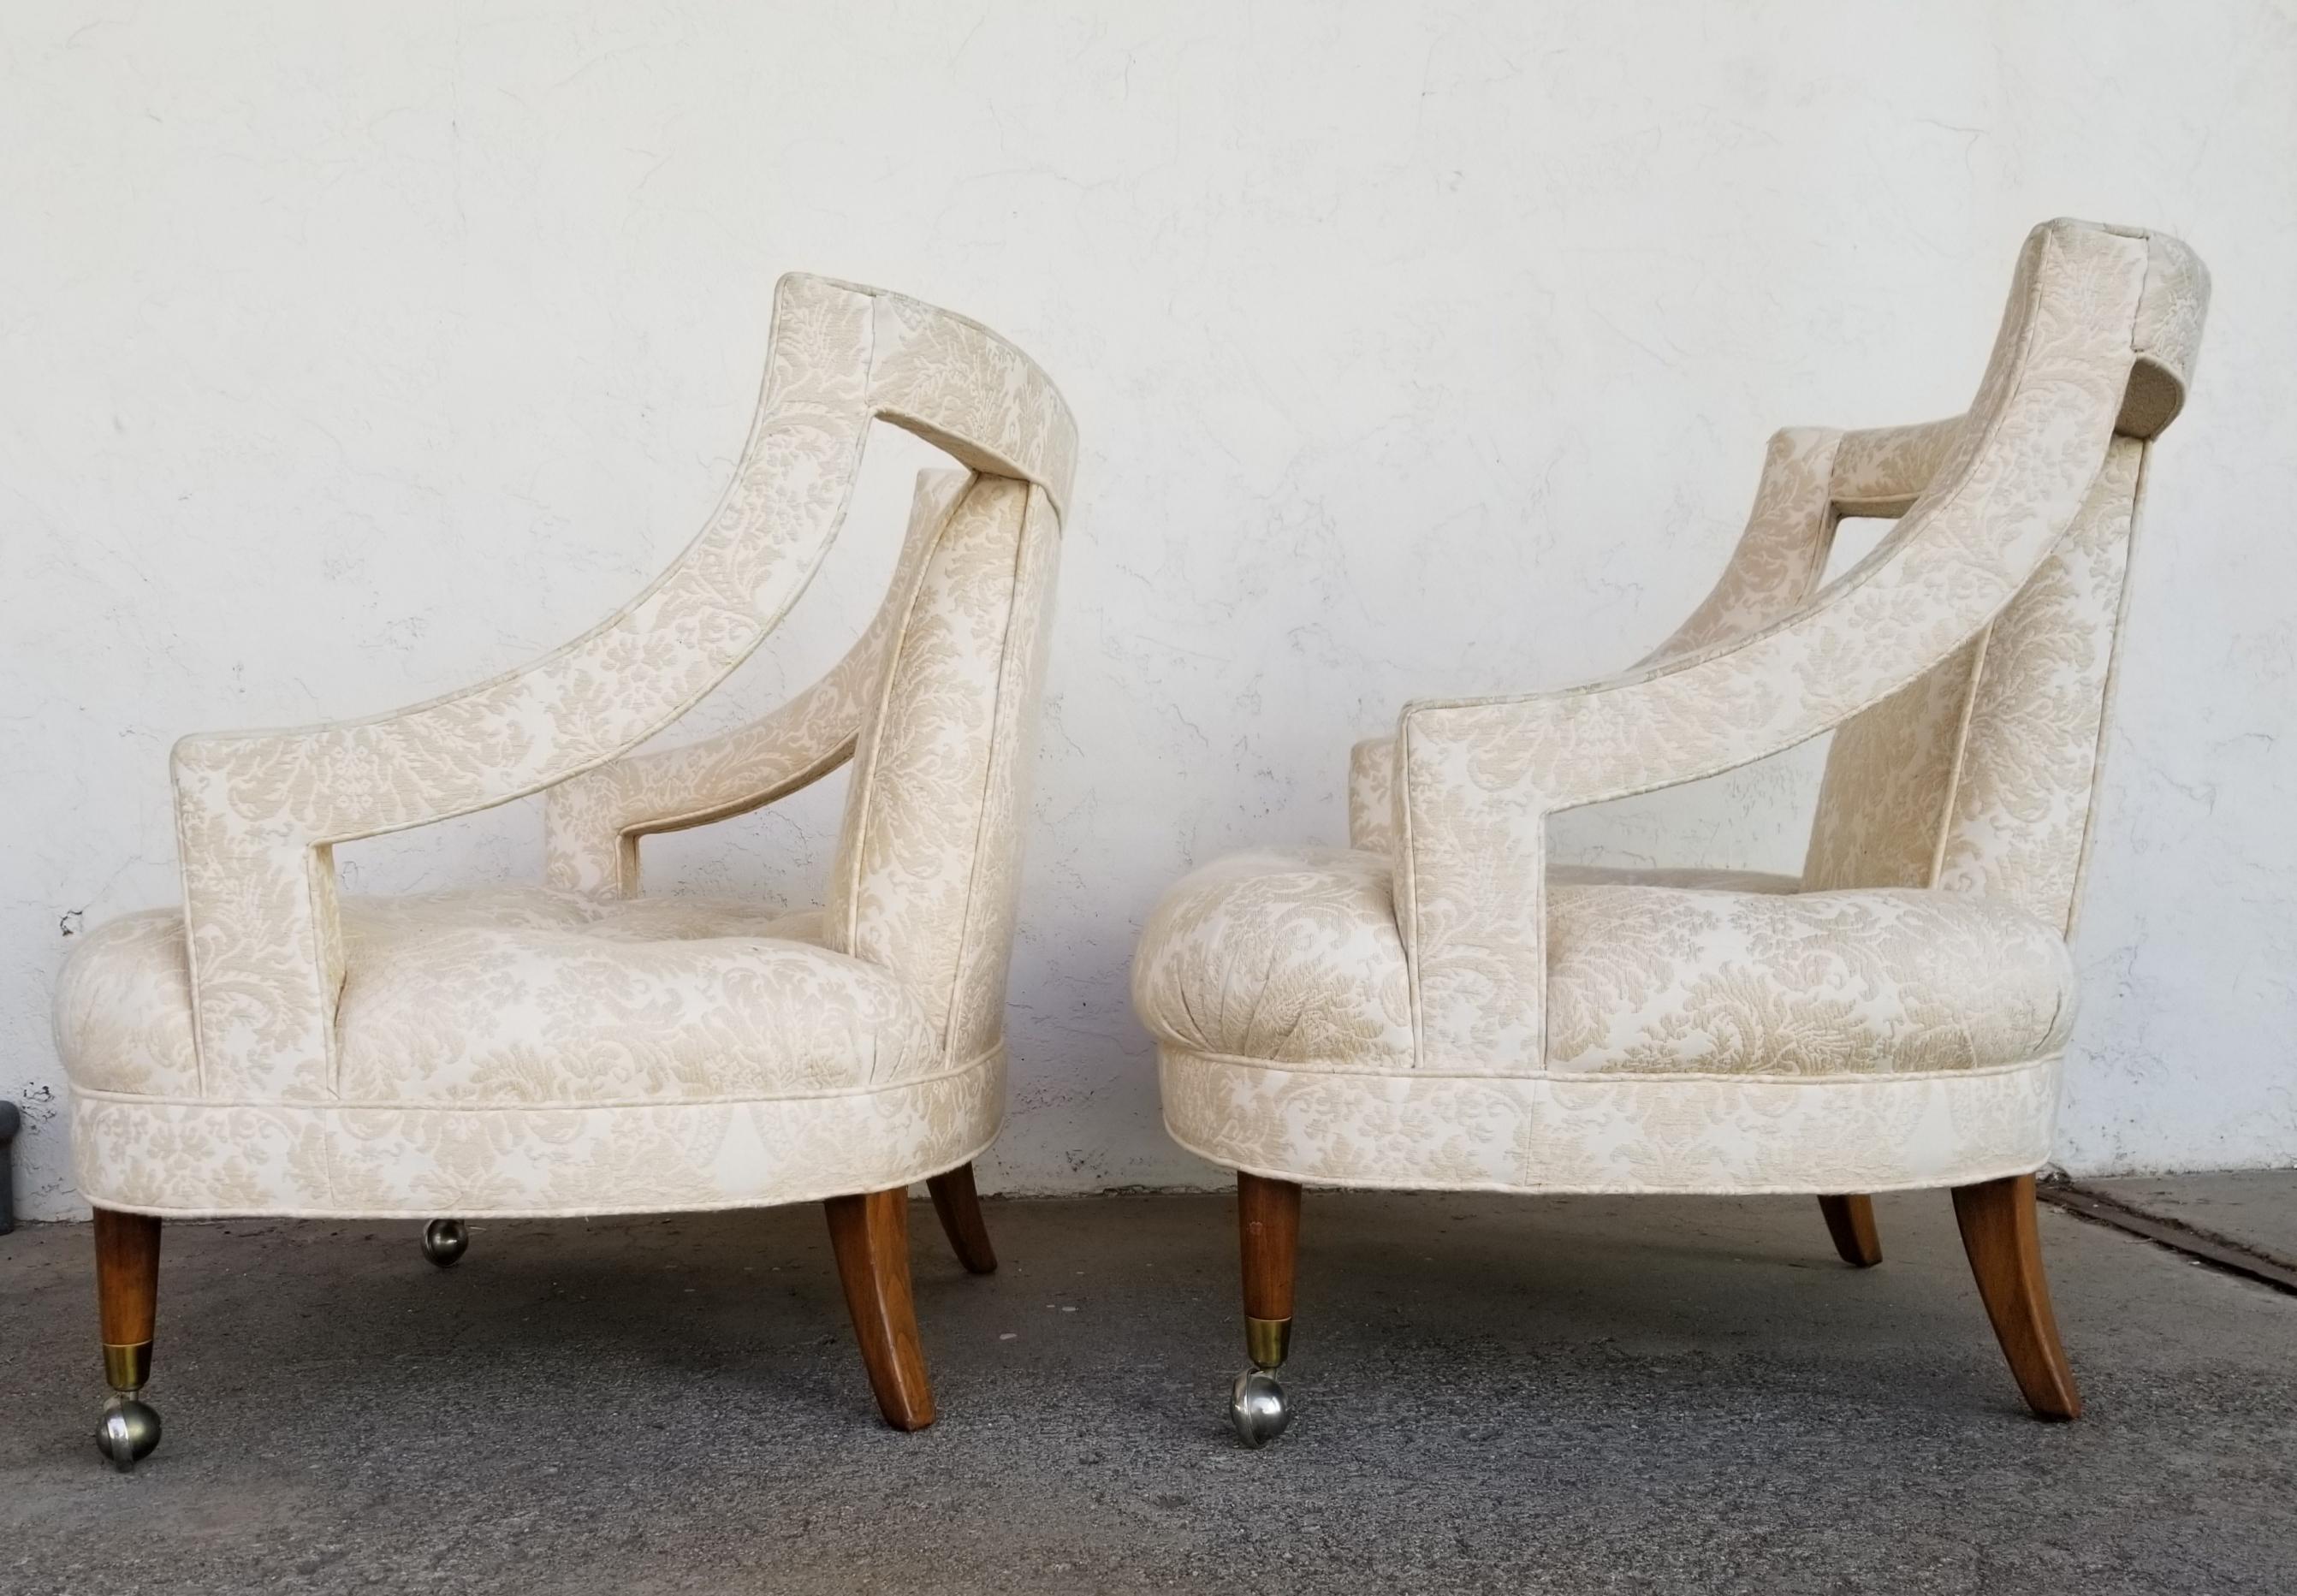 Pair of open arm upholstered lounge chairs in excellent original condition. Fine craftsmanship including solid walnut legs. Very comfortable oversized seats measuring 24